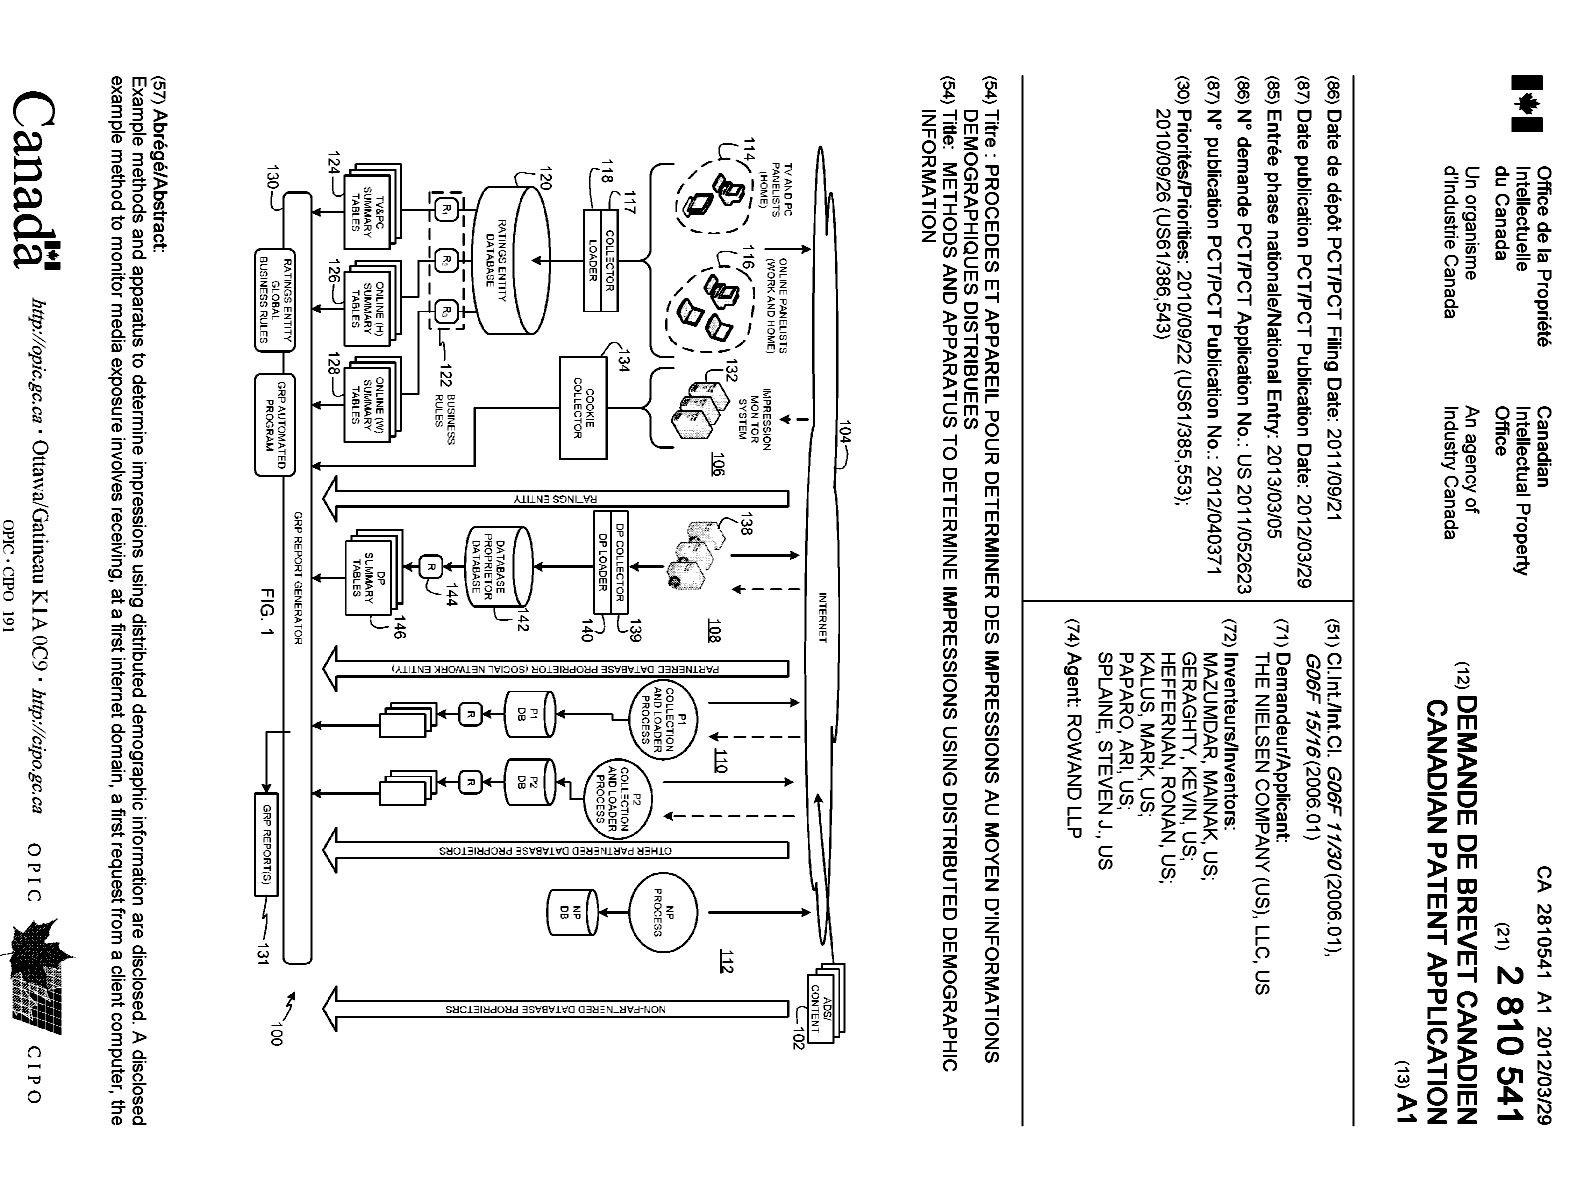 Canadian Patent Document 2810541. Cover Page 20121210. Image 1 of 2